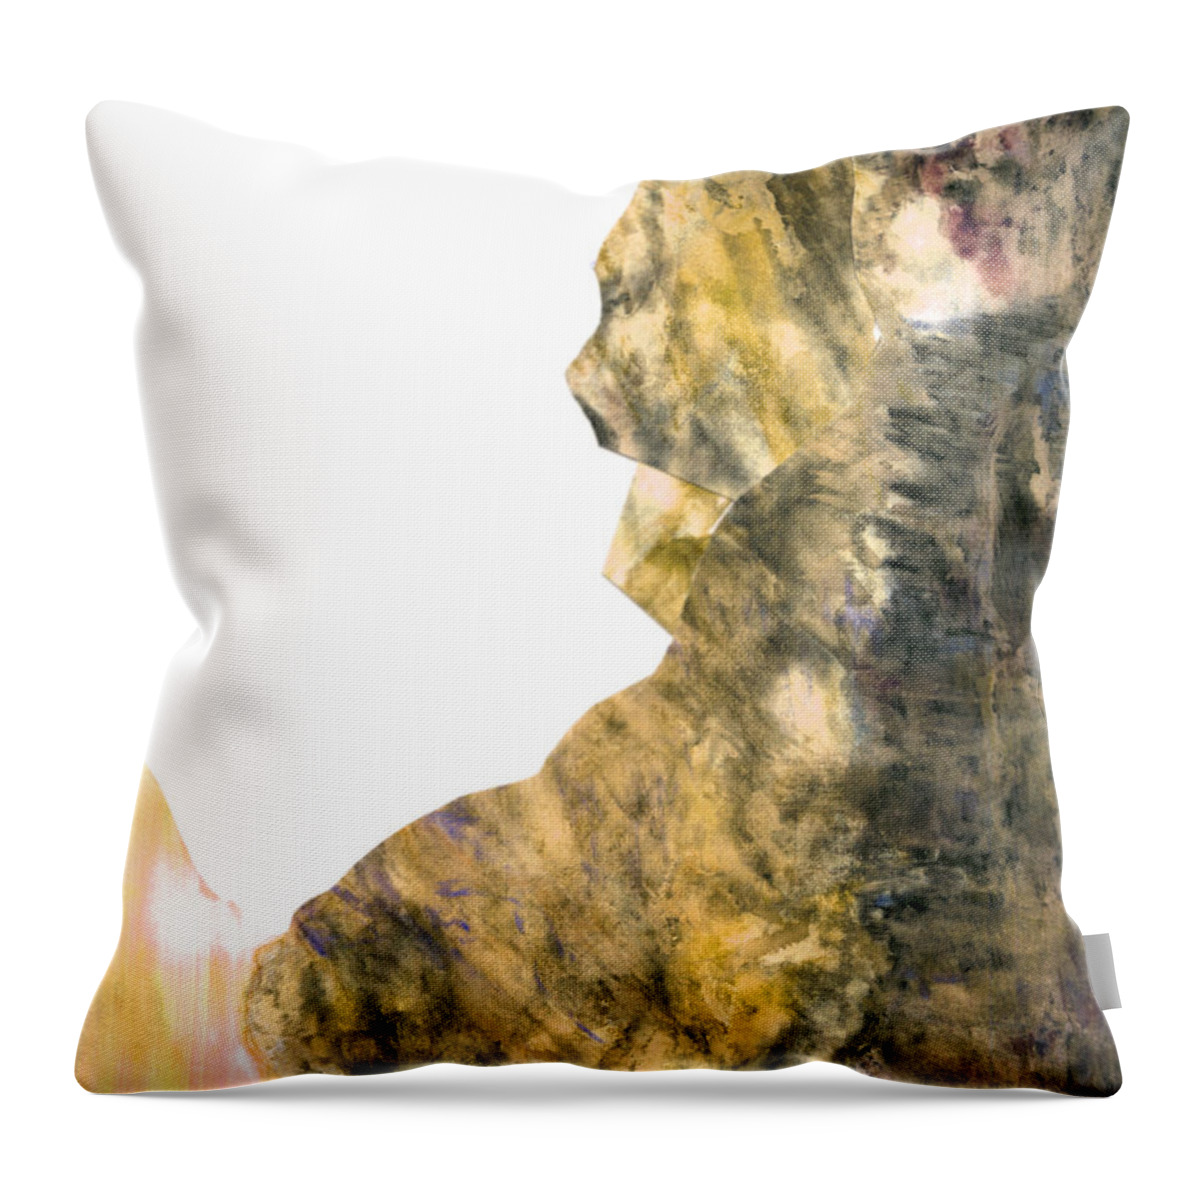 Breathe Throw Pillow featuring the painting Breathe by Mary Zimmerman